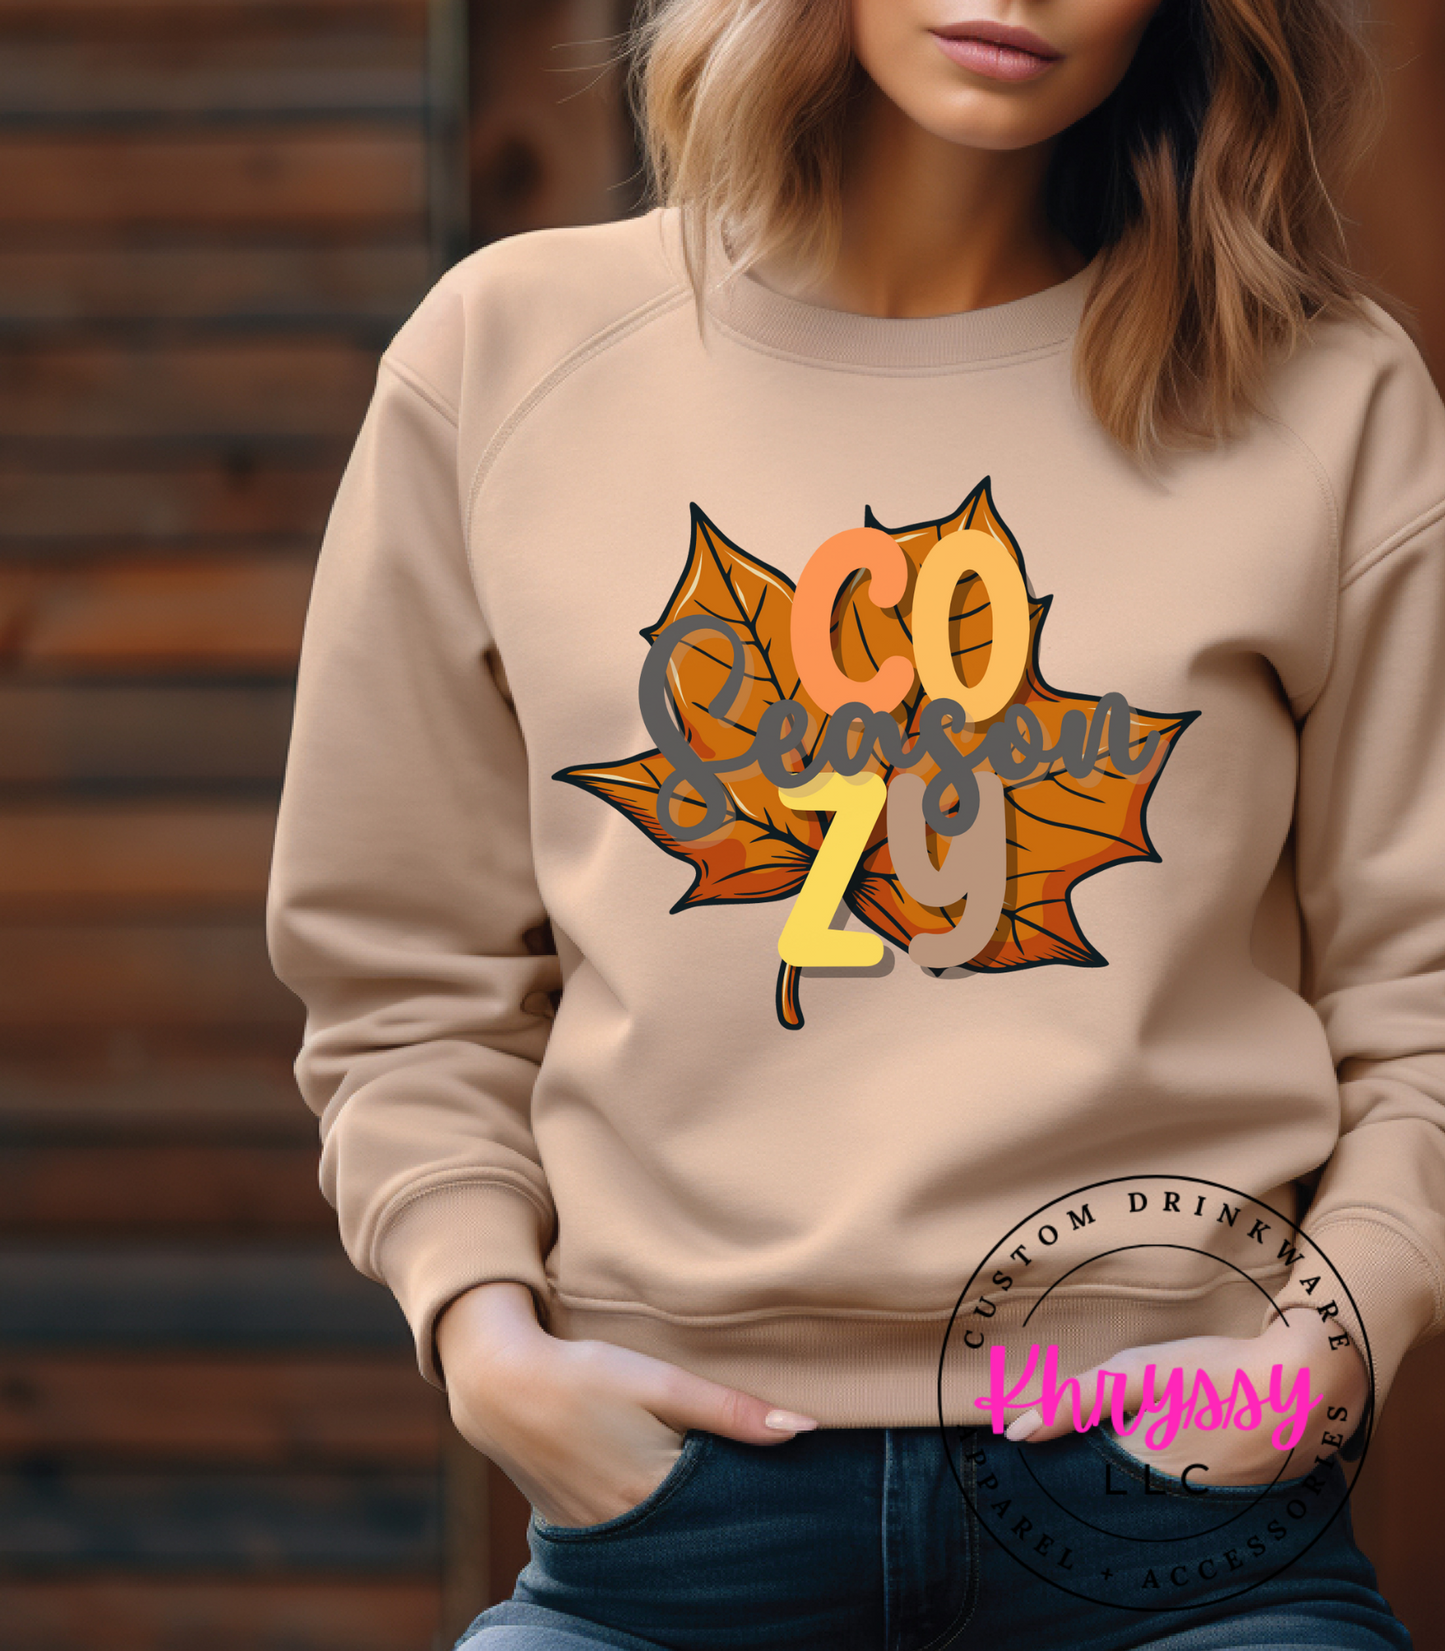 Autumn Bliss: Cozy Season Shirt - Embrace the Warmth of Fall!